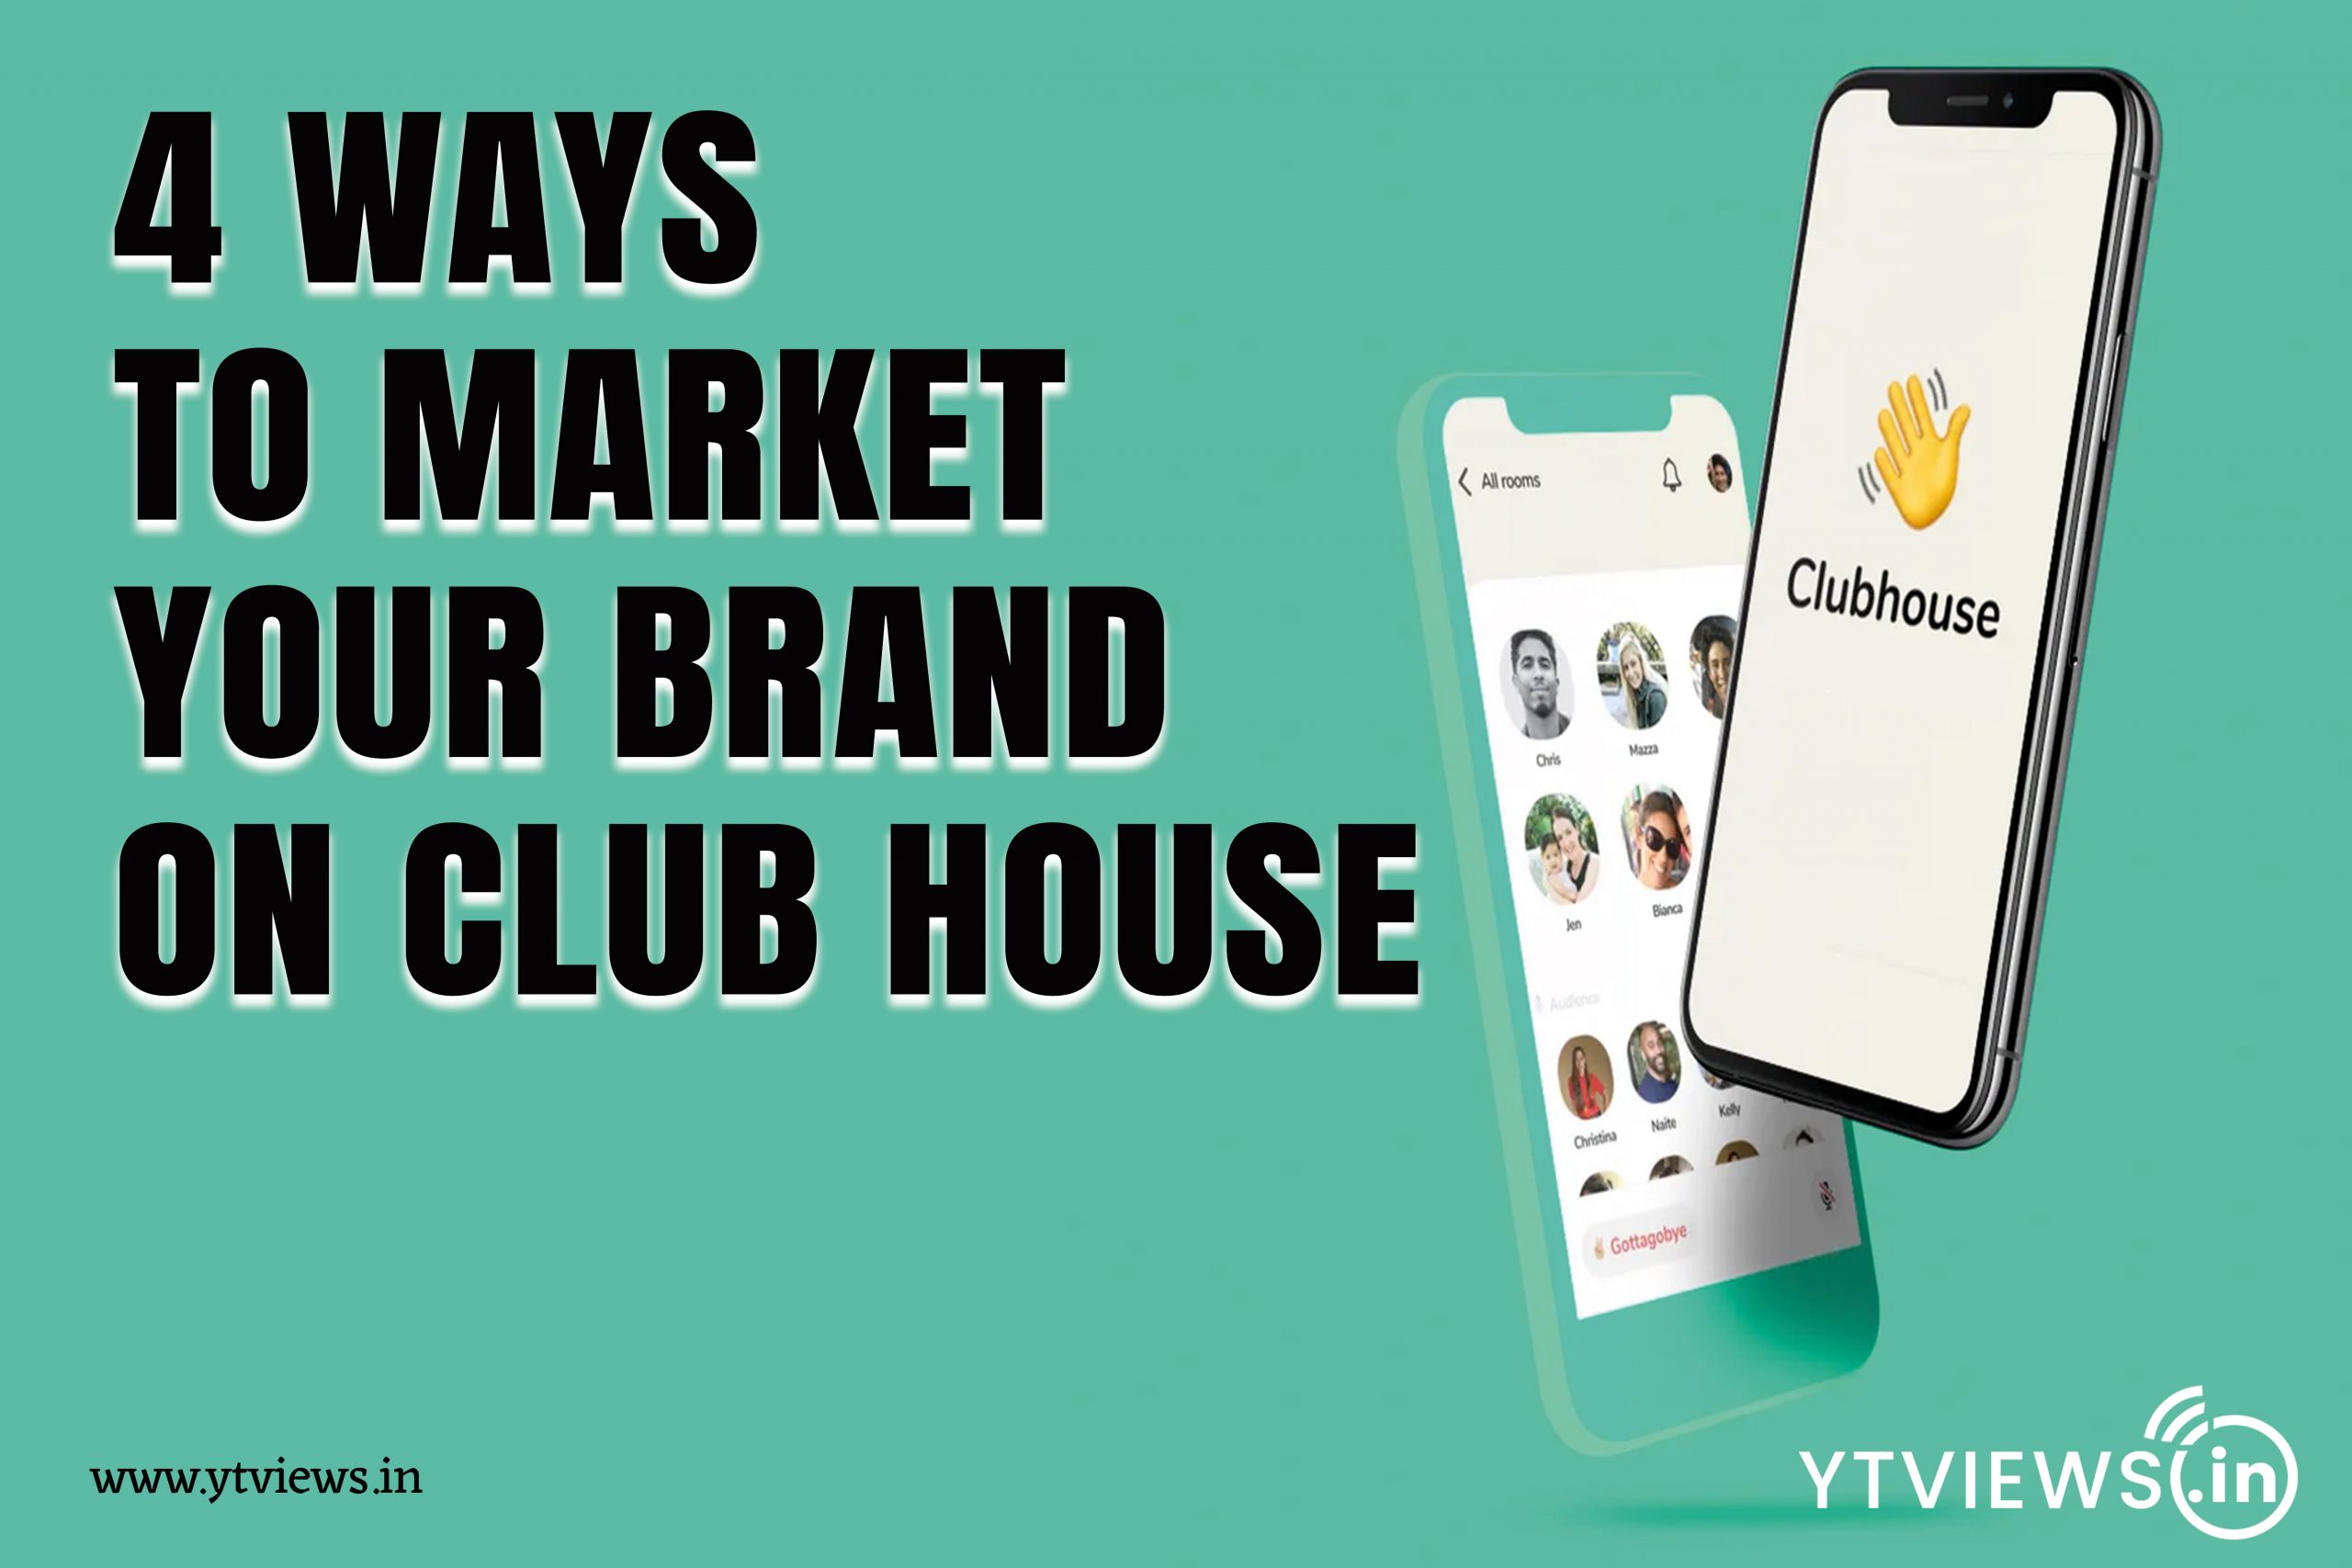 4 ways to market your brand on Clubhouse